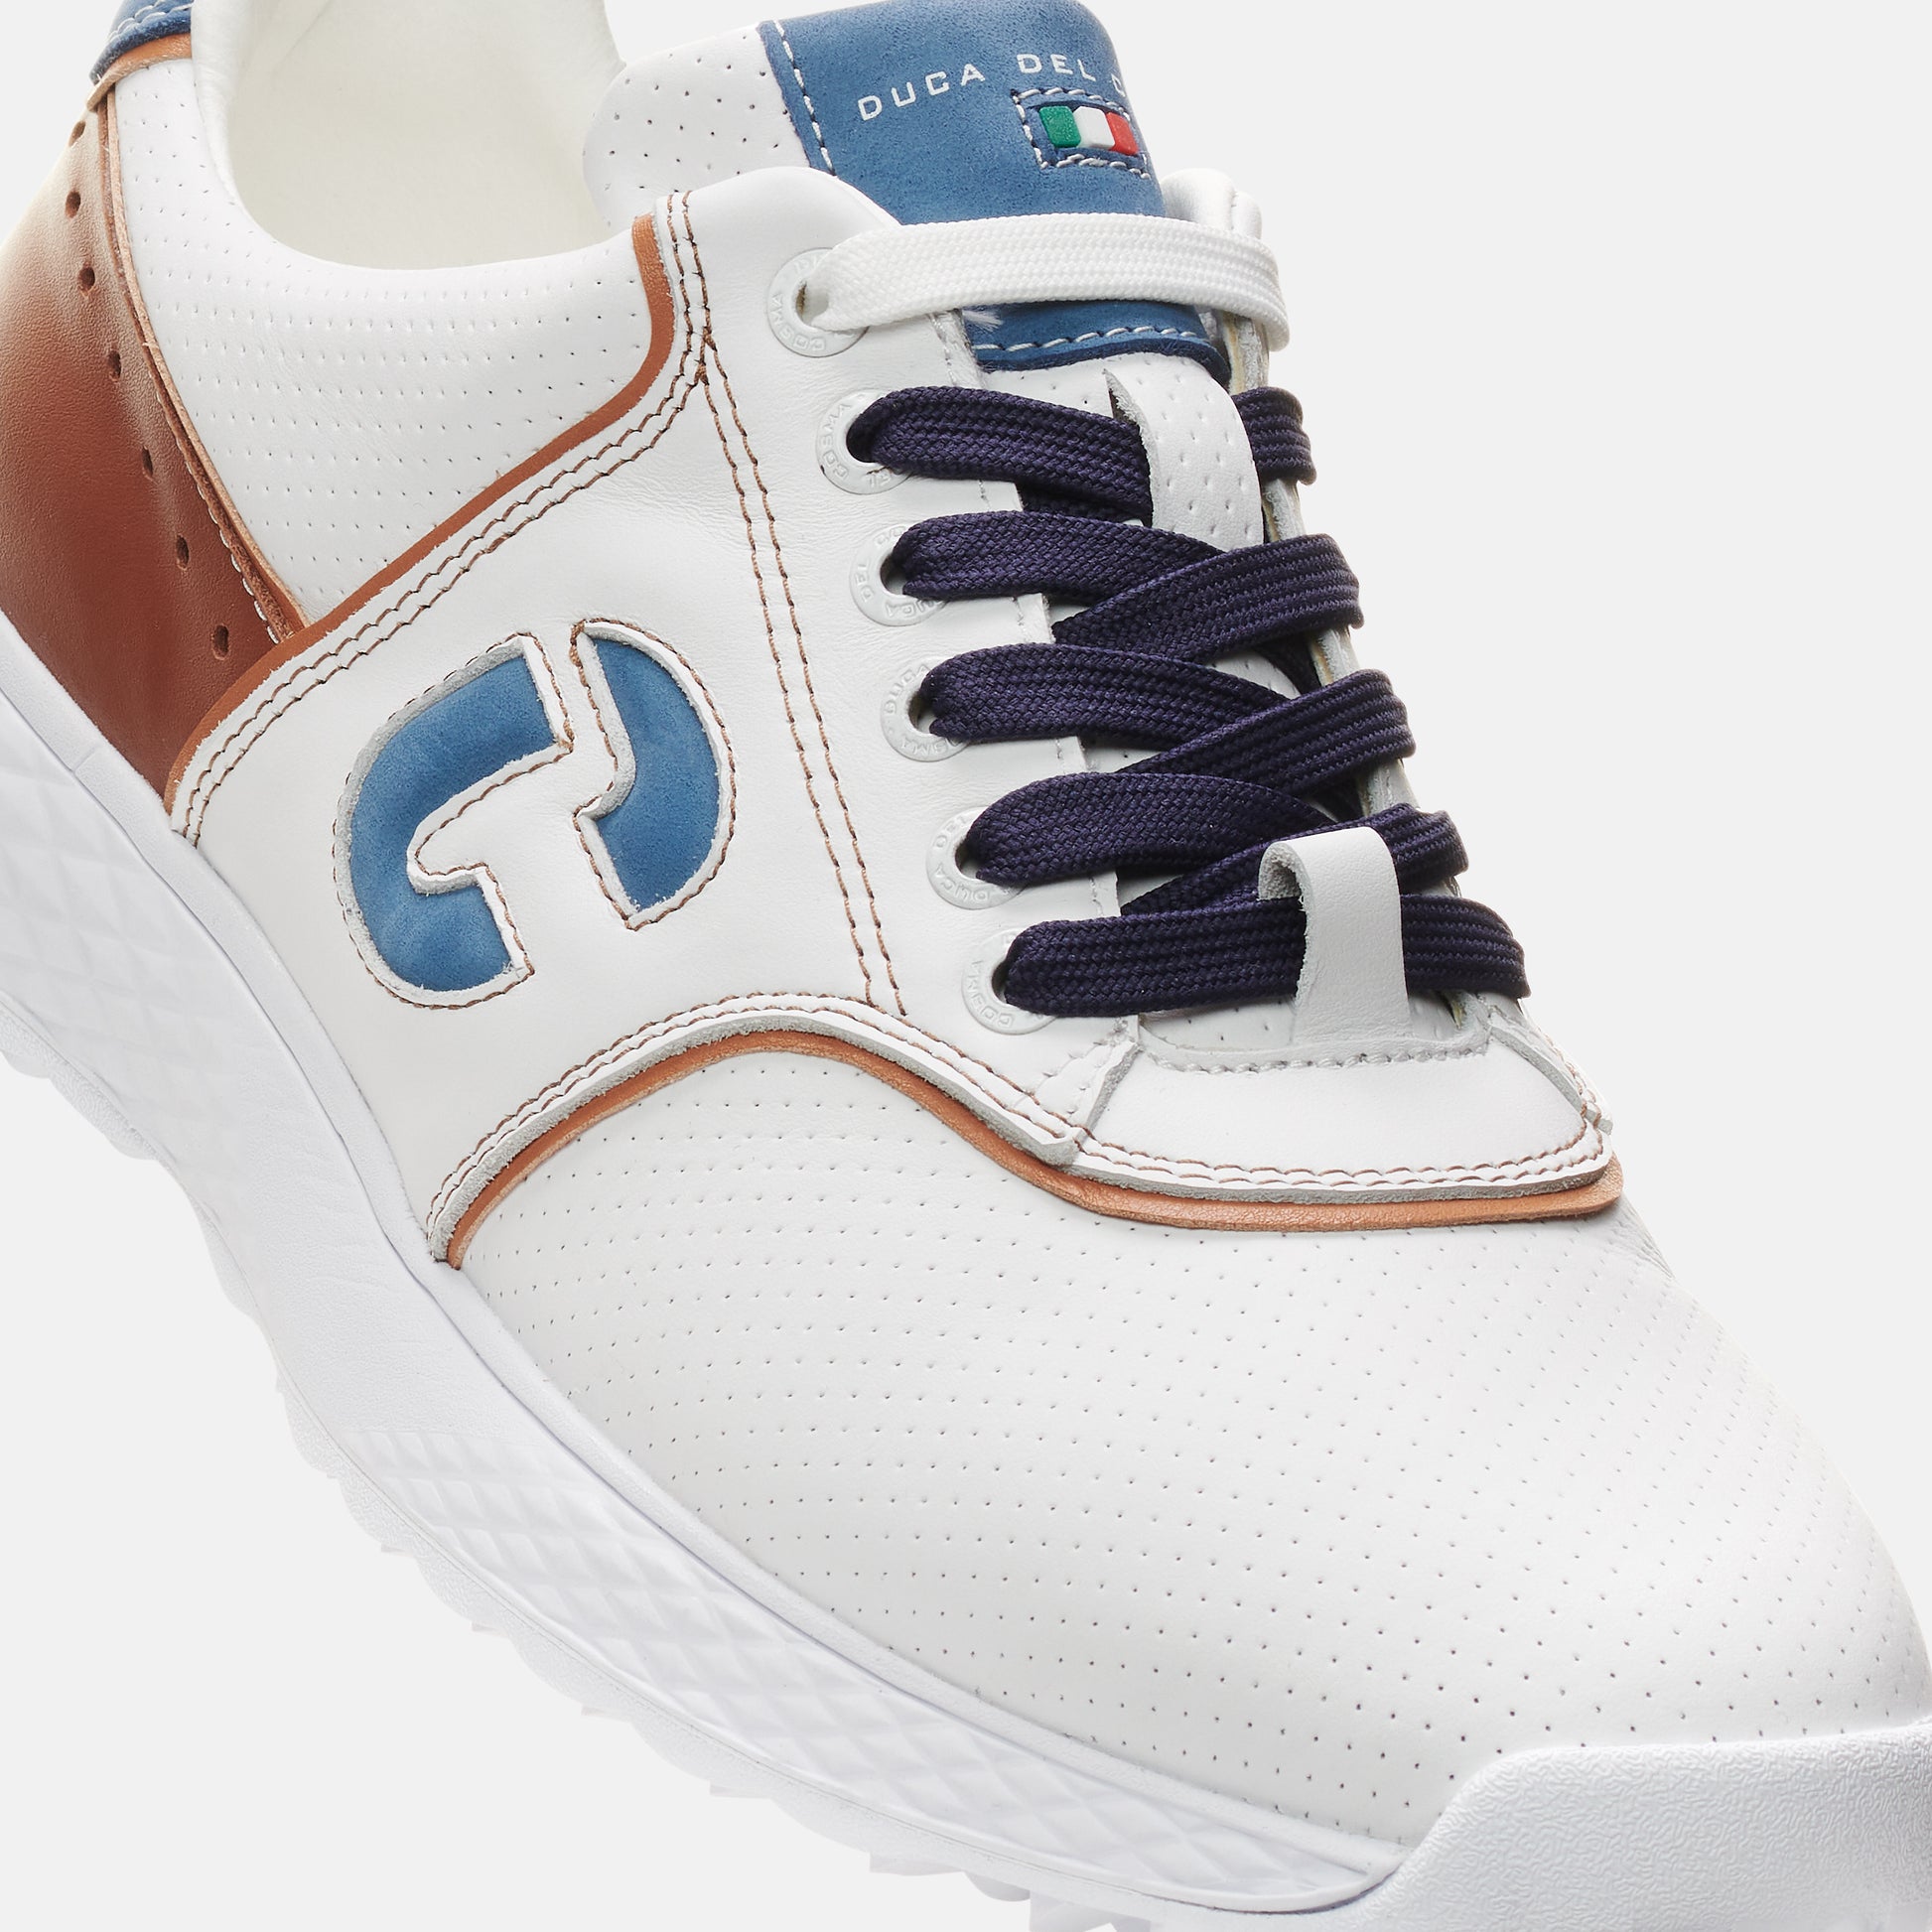 Positano white mens Golf Shoes Duca del Cosma Waterproof best golf shoe for the golf course